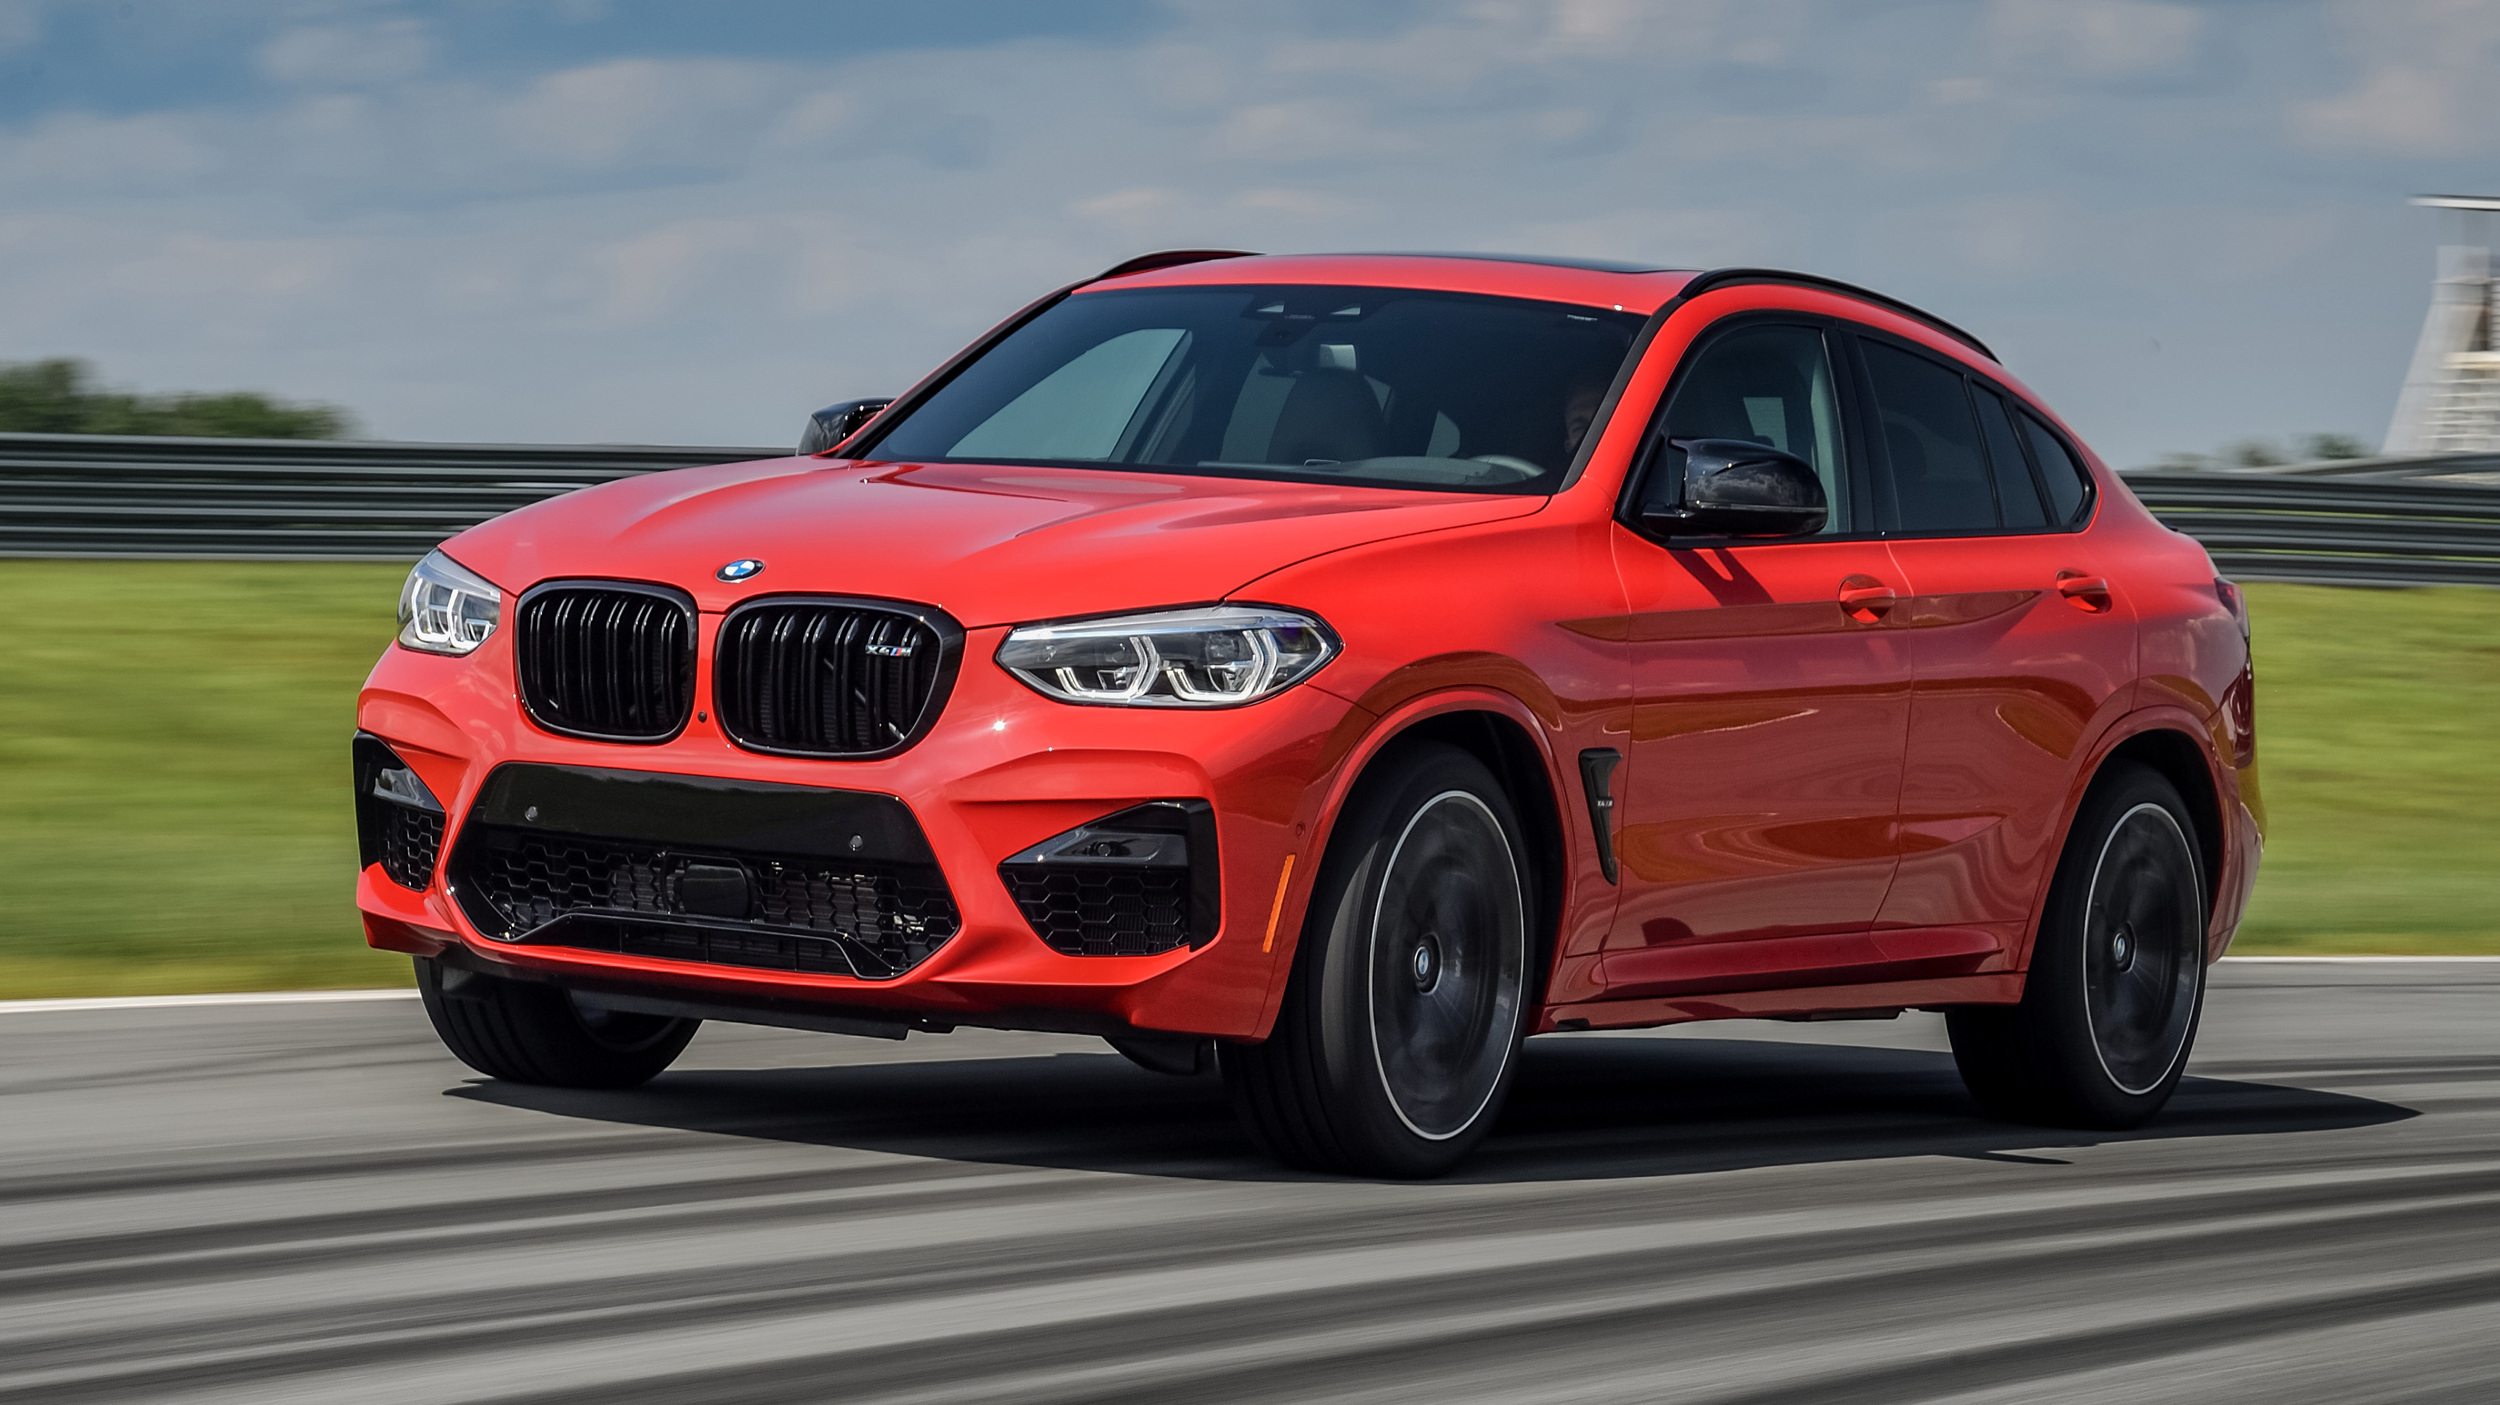 2020 BMW X4 M Competition Photo Gallery